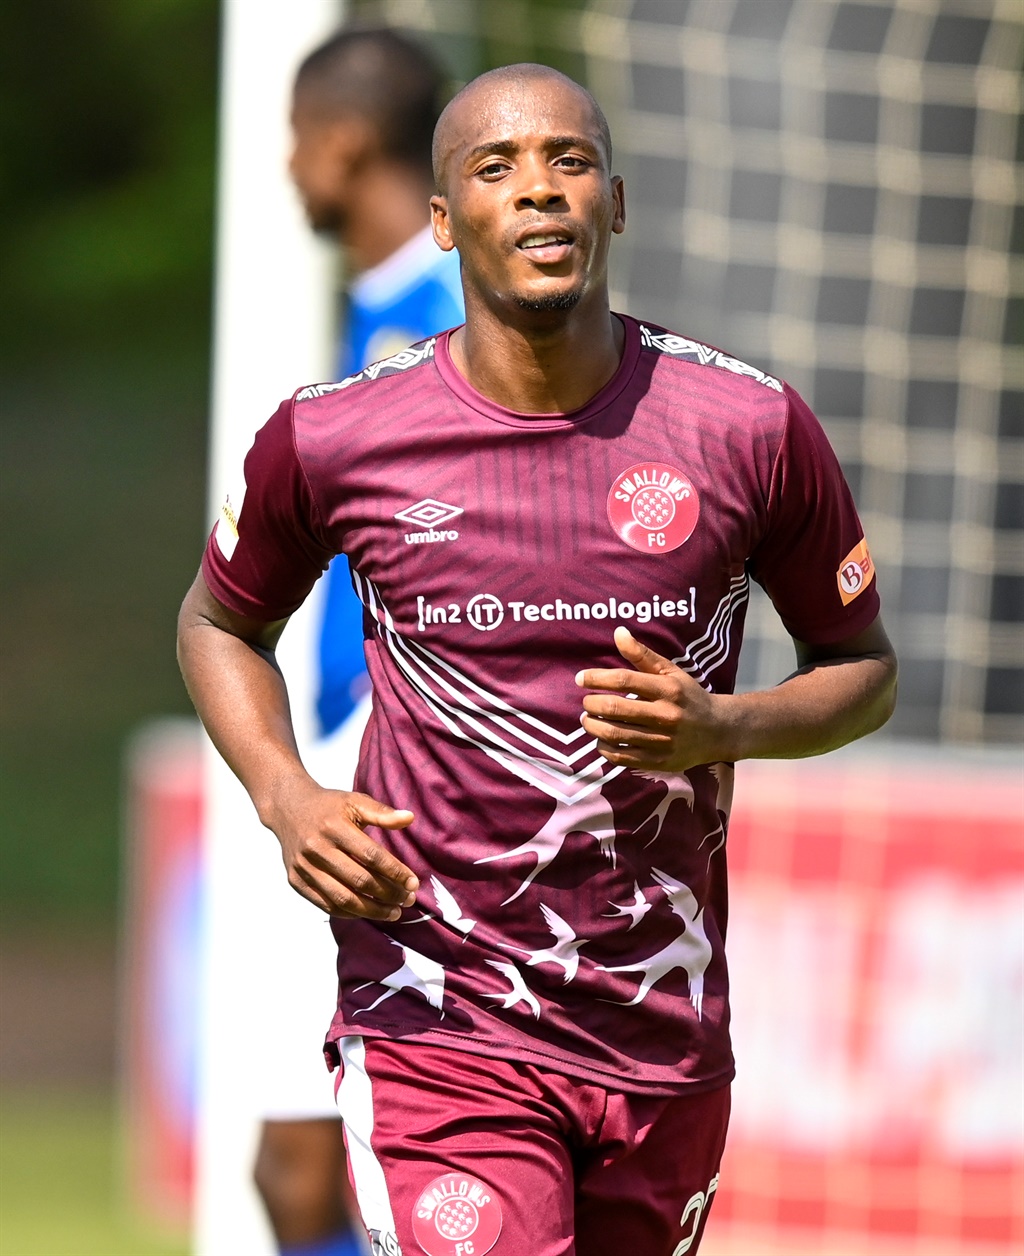 Phumelele Bhengu of Swallows FC scores for his team during the GladAfrica Championship 2019/20 game between Royal Eagles and Swallows FC and Harry Gwala Stadium in Pietermaritzburg on 1 March 2020 © Gerhard Duraan/BackpagePix